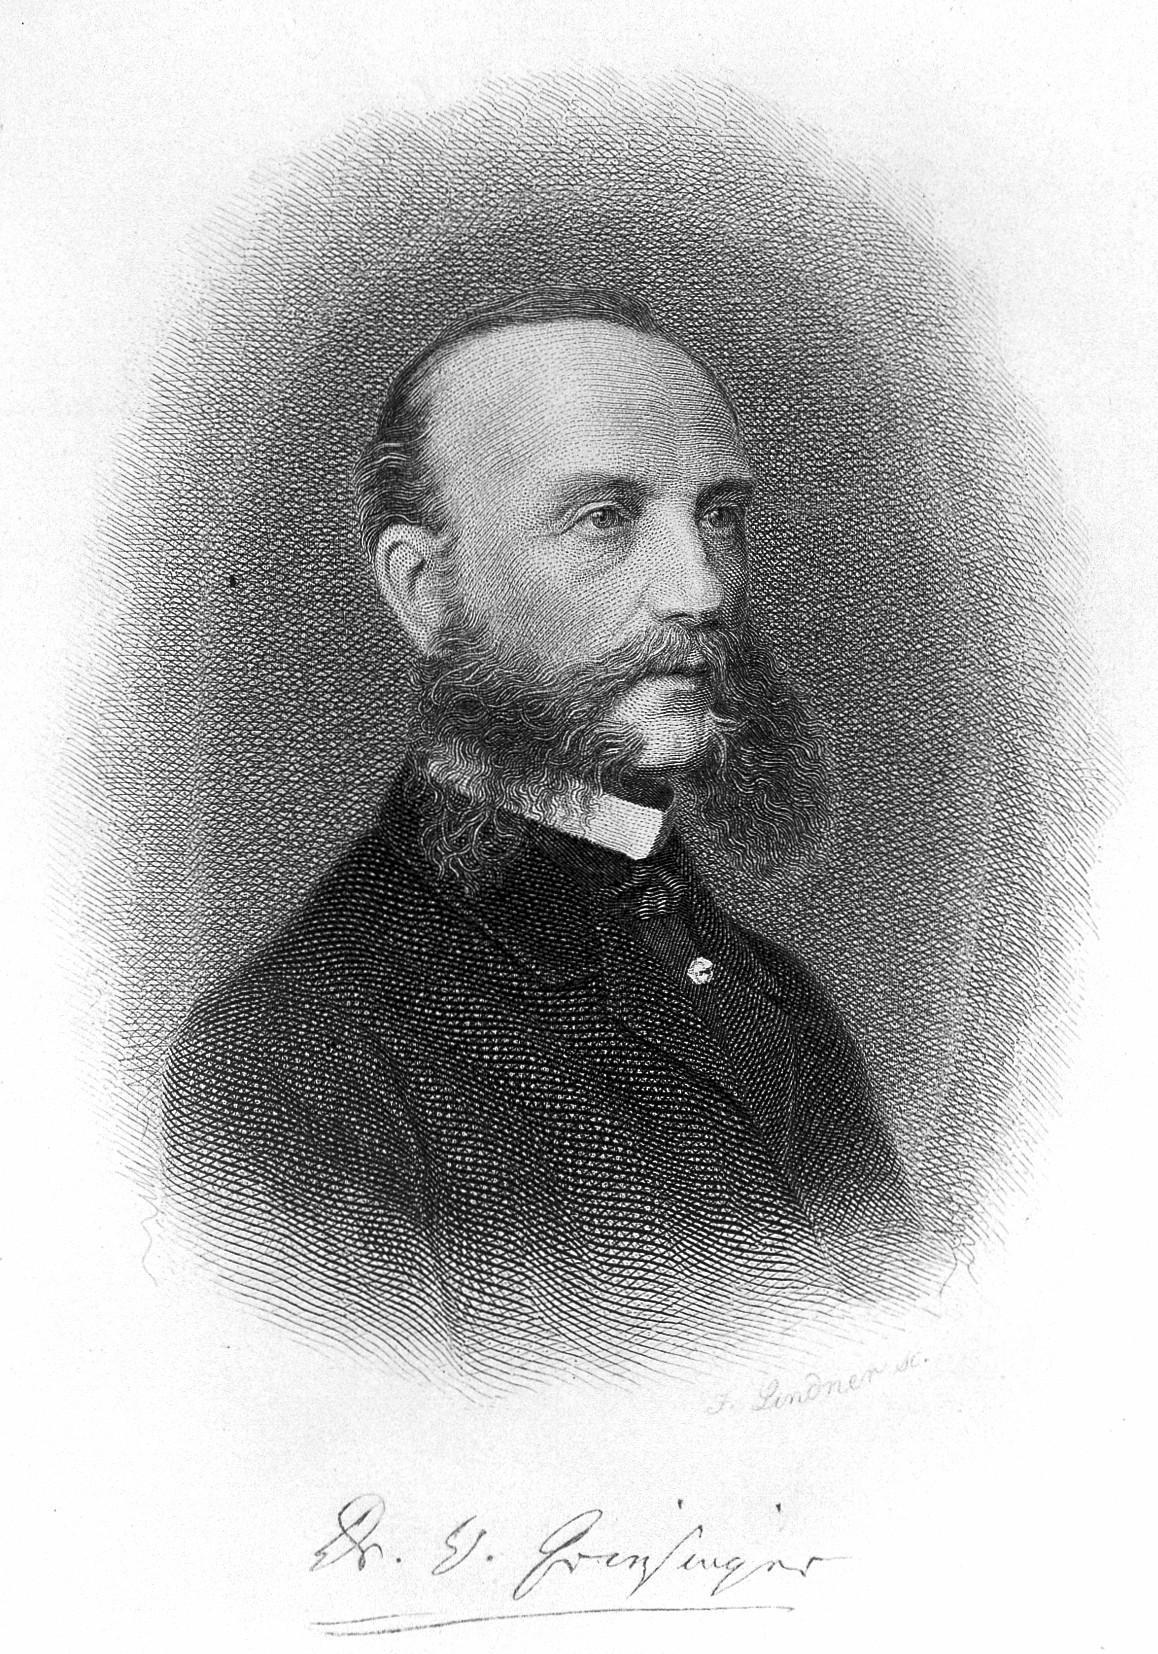 L0015537 Portrait of Wilhelm Griesinger Credit: Wellcome Library, London. Wellcome Images images@wellcome.ac.uk http://wellcomeimages.org Portrait of Wilhelm Griesinger Engraving Die Pathologie und Therapie der psychischen Krankheiten Griesinger, Wilhelm Published: 1871 Copyrighted work available under Creative Commons Attribution only licence CC BY 4.0 http://creativecommons.org/licenses/by/4.0/